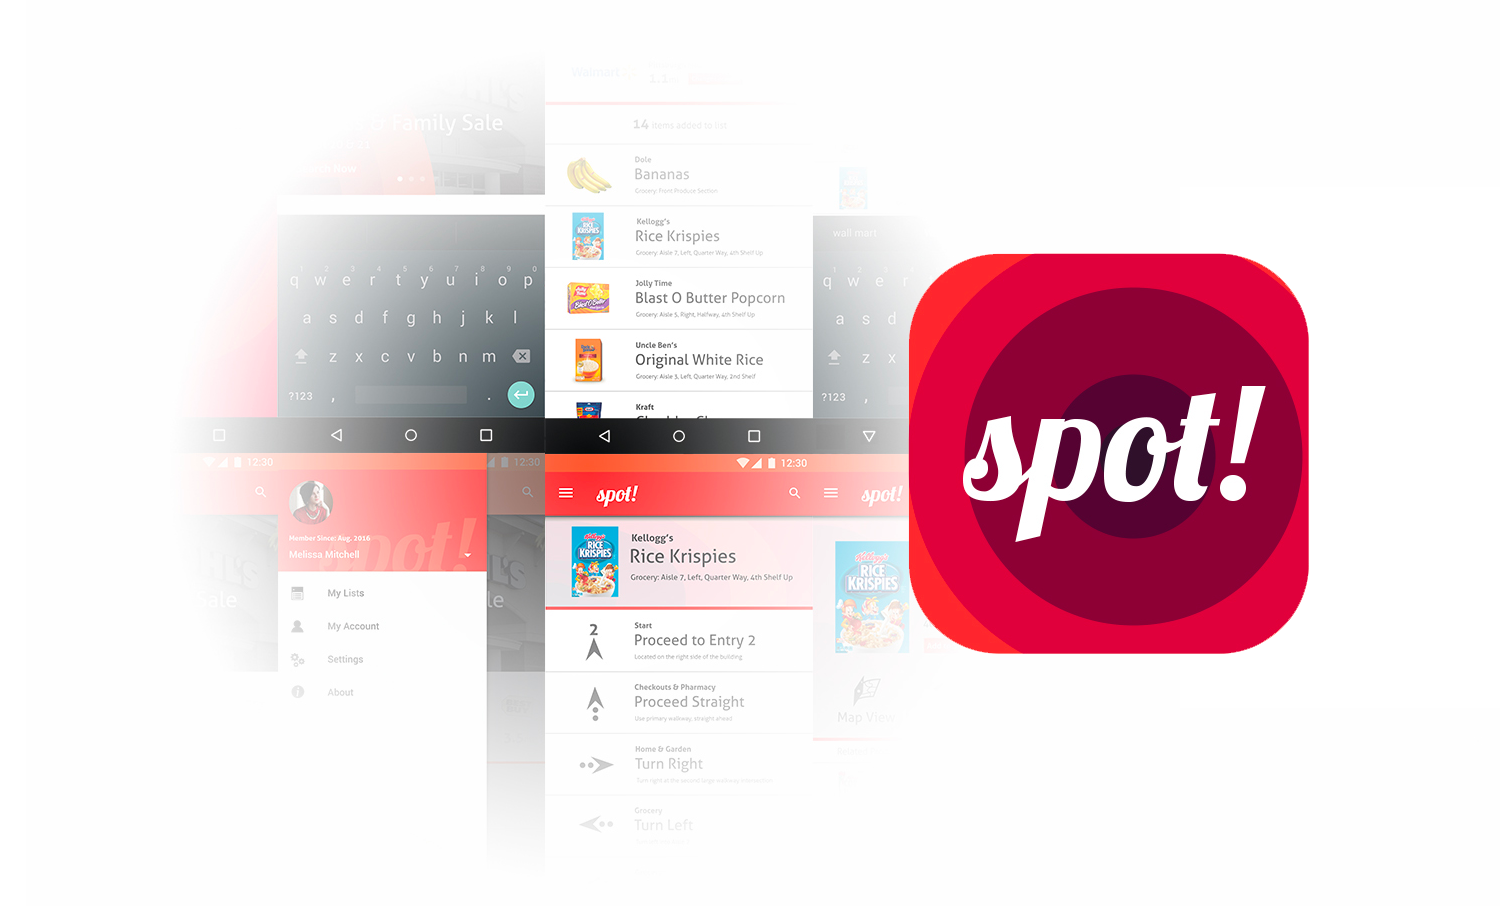 spot! app icon and interfaces